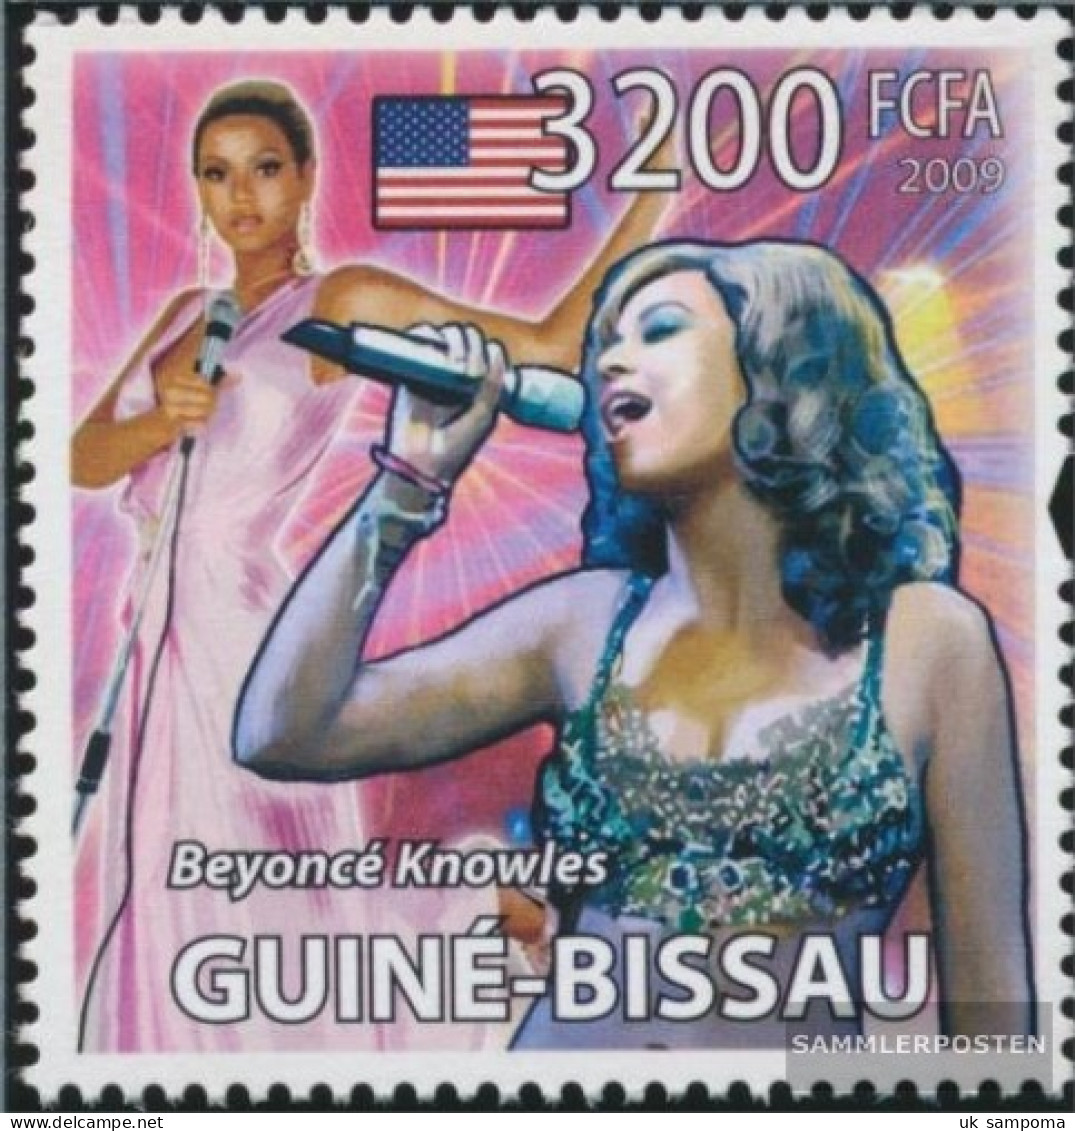 Guinea-Bissau 4413 (complete. Issue) Unmounted Mint / Never Hinged 2009 Famous Musicians - Guinea-Bissau